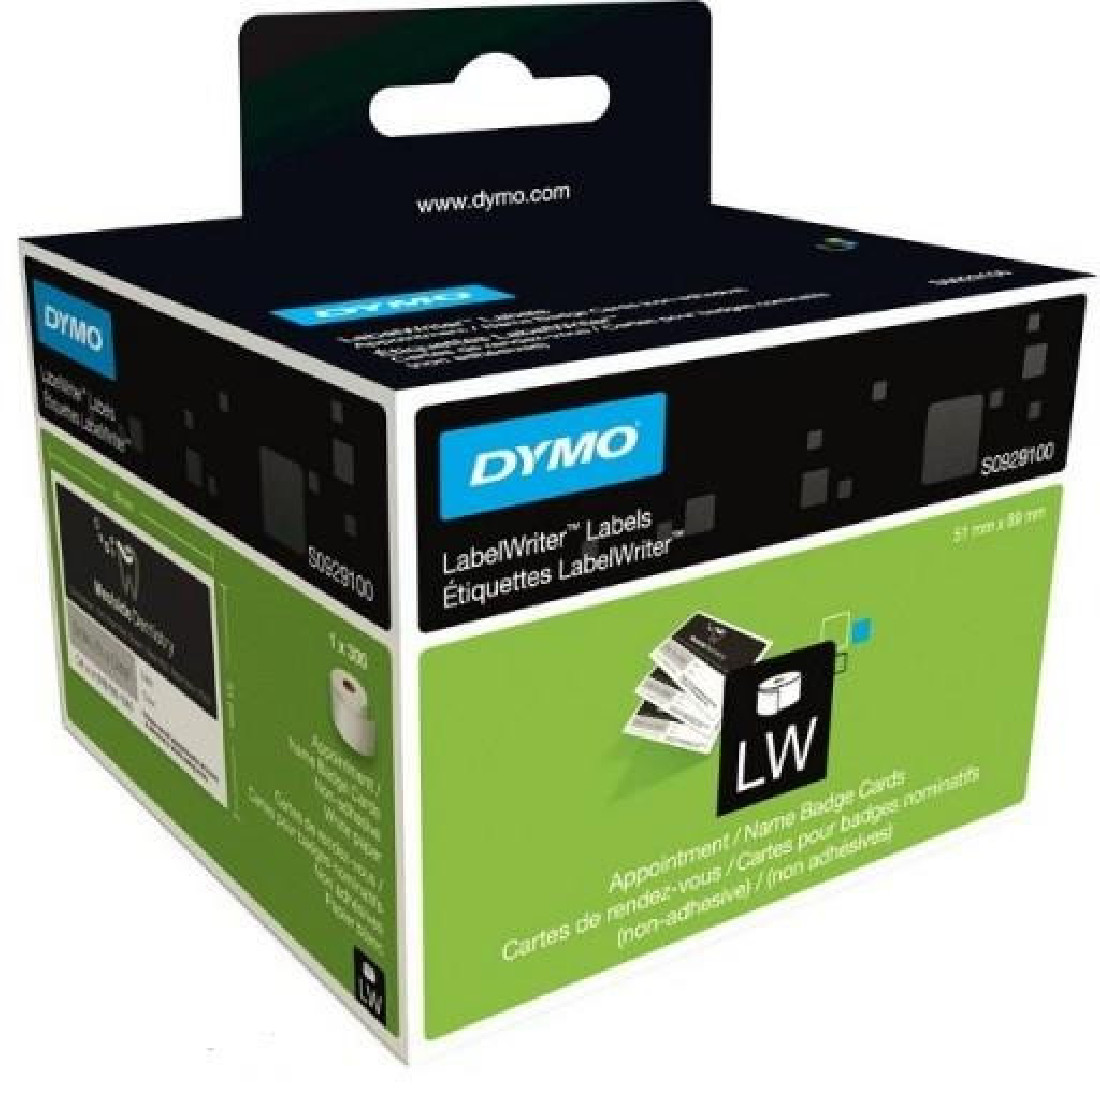 DYMO 0929100 LW Appointment / Name Badge Cards 5,1x8,9cm S0929100